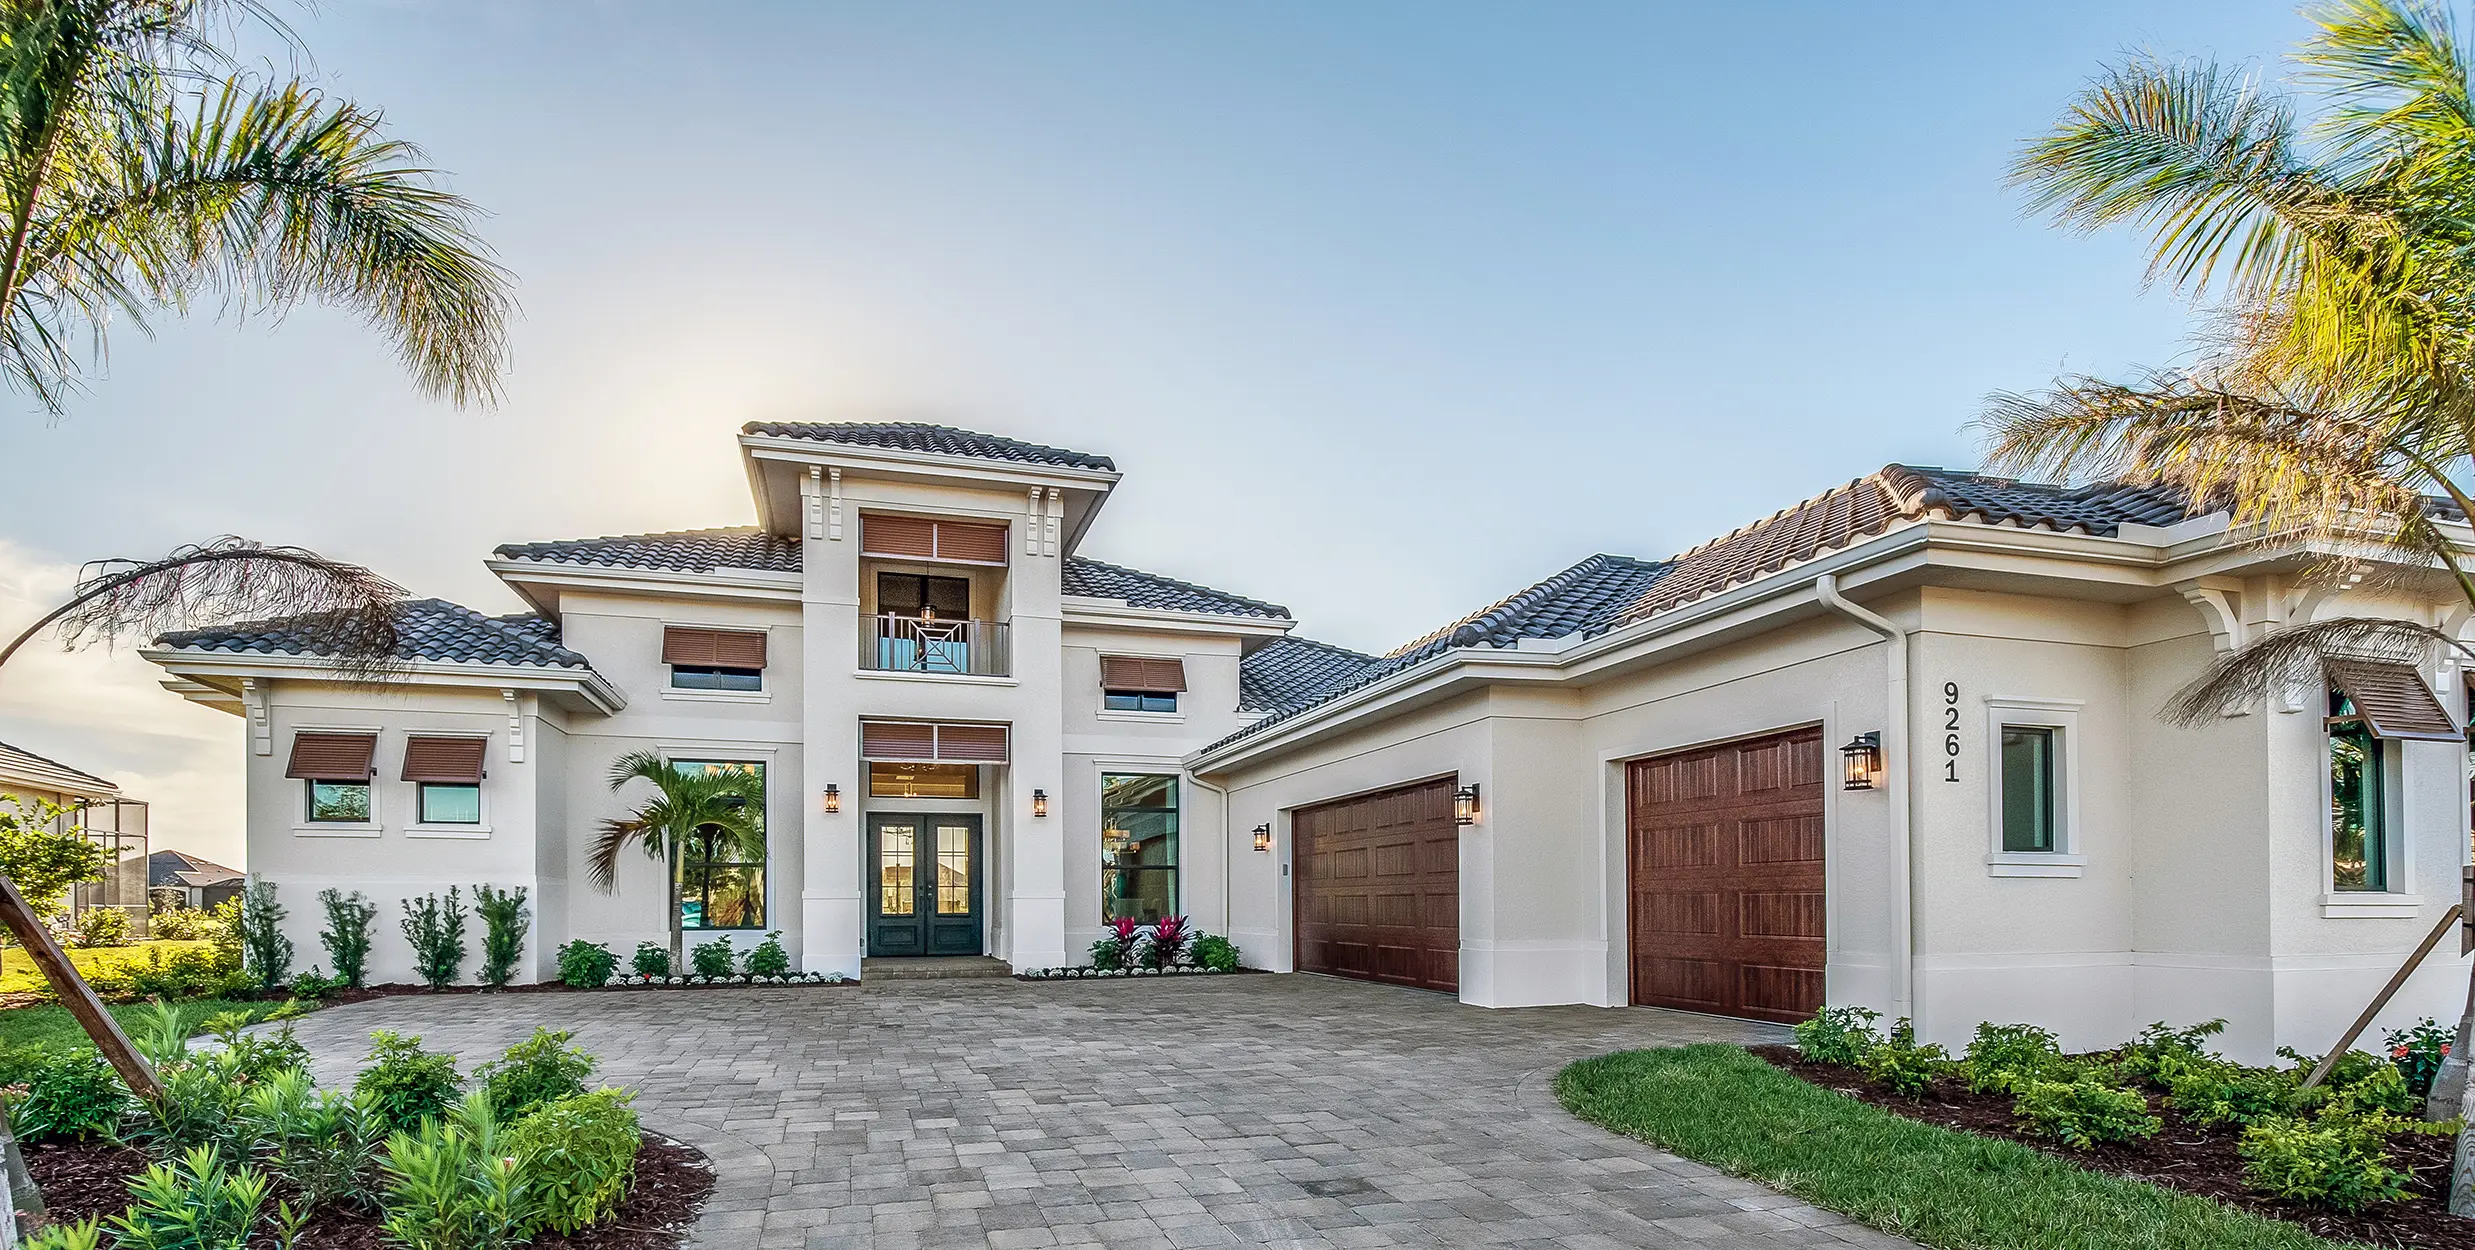 Sunny Florida home with two car garage and entrance surrounded by small palm trees.